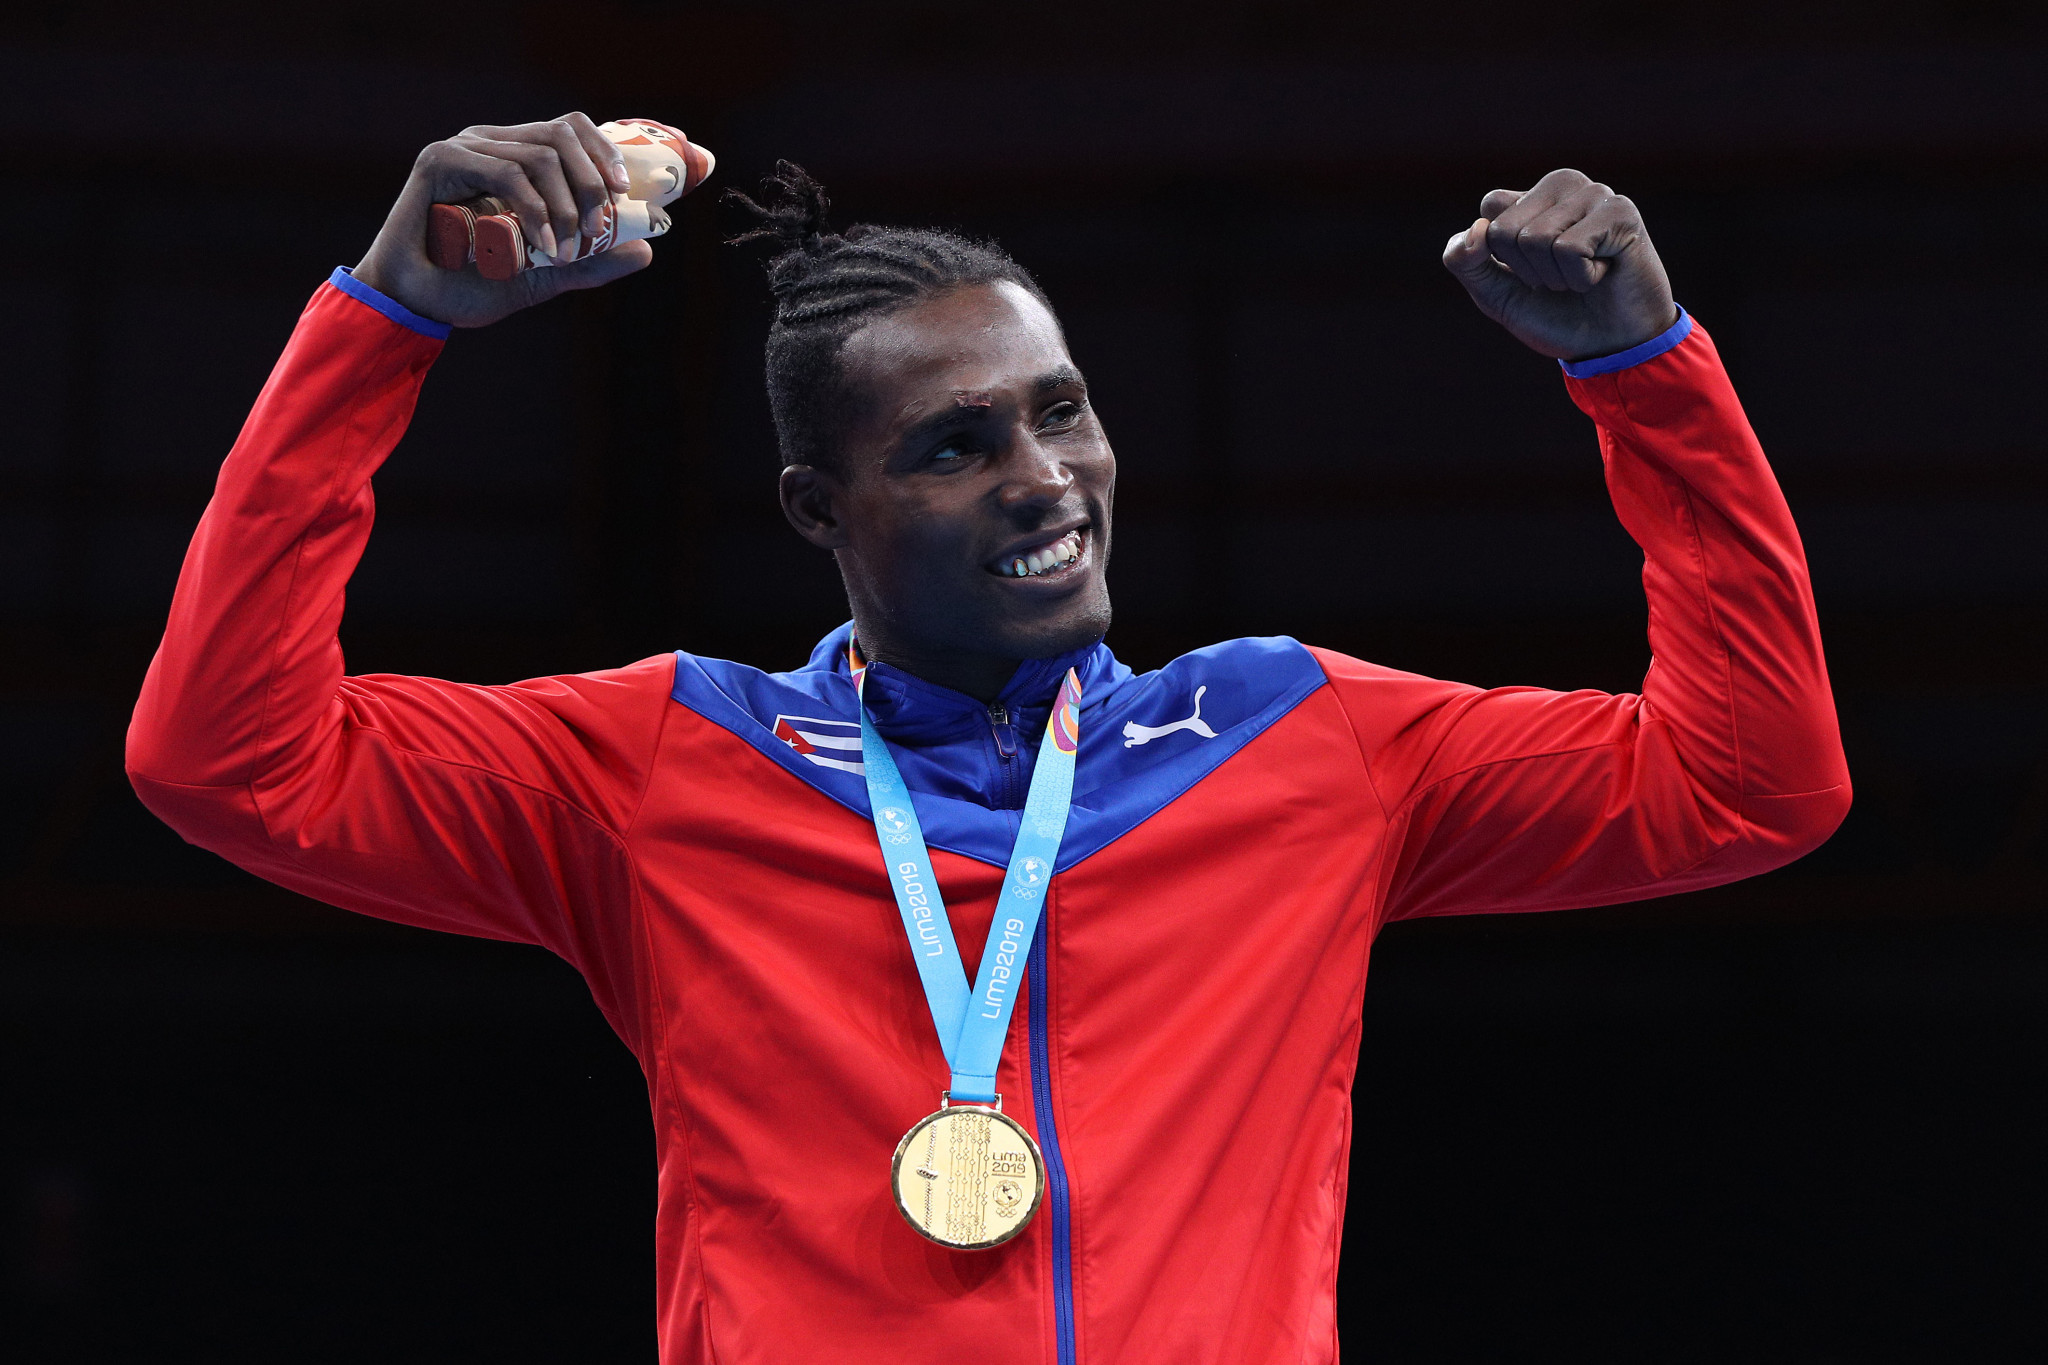 Cuba's Julio César La Cruz Peraza is seeking his fifth world title in Yekaterinburg, having recently triumphed at the Lima 2019 Pan American Games ©Getty Images